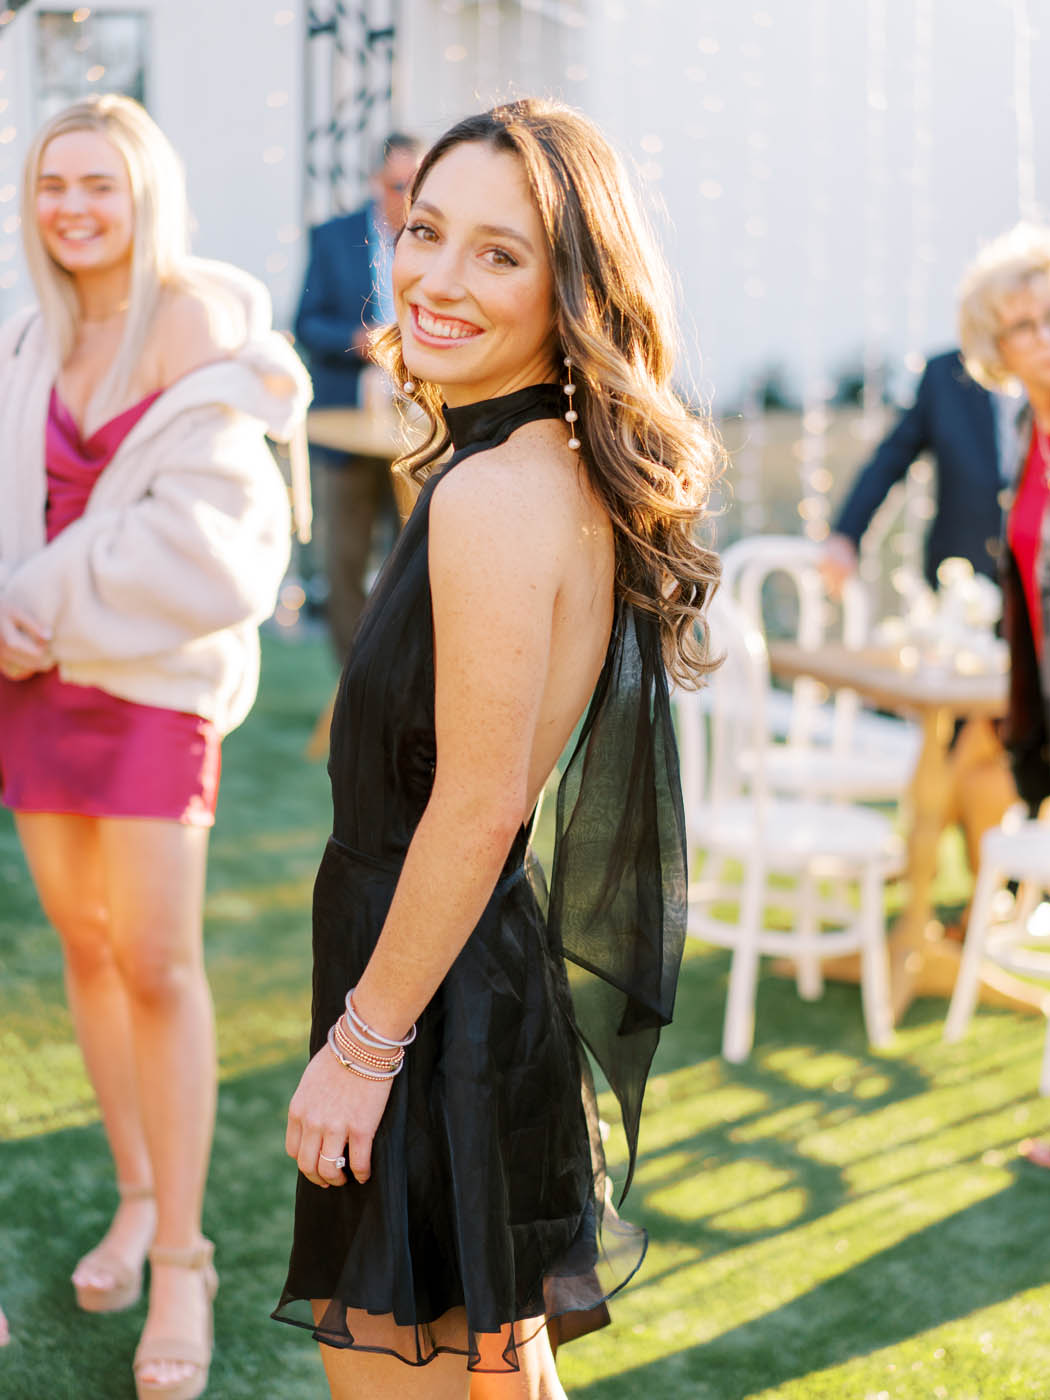 A portrait of a fashionable wedding guest at cocktail hour